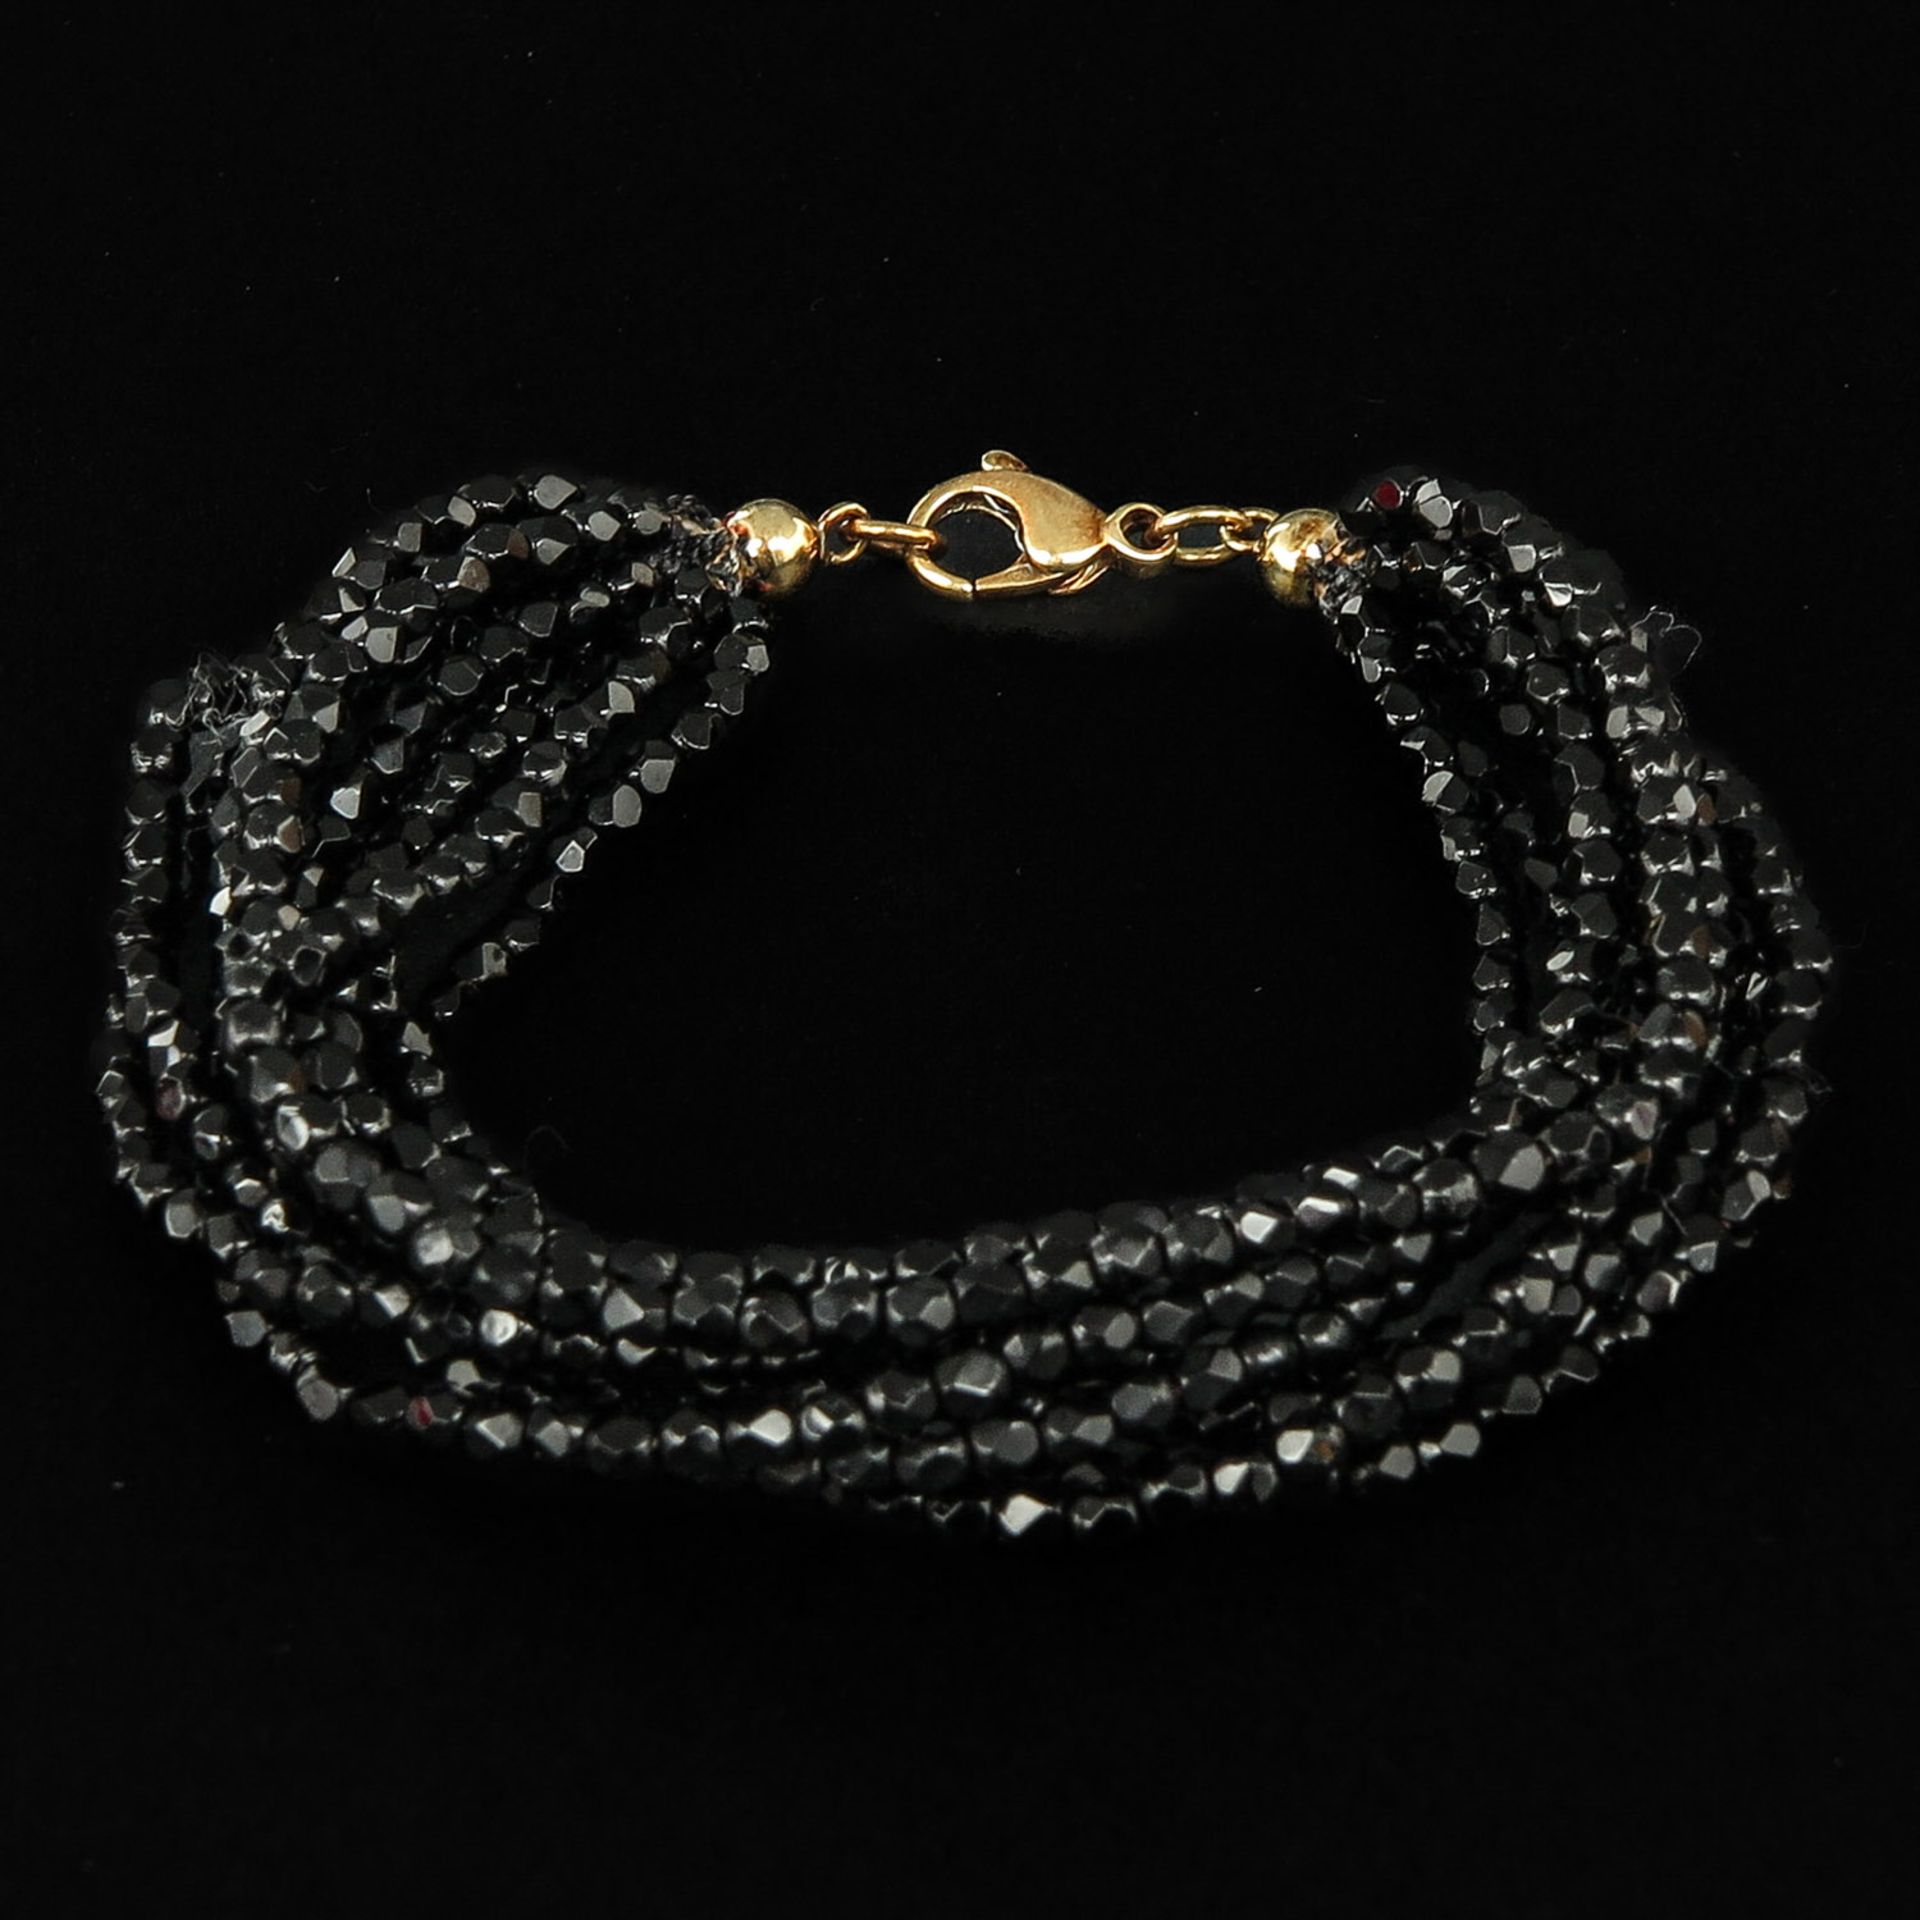 A Garnet Necklace with 14KG Clasp